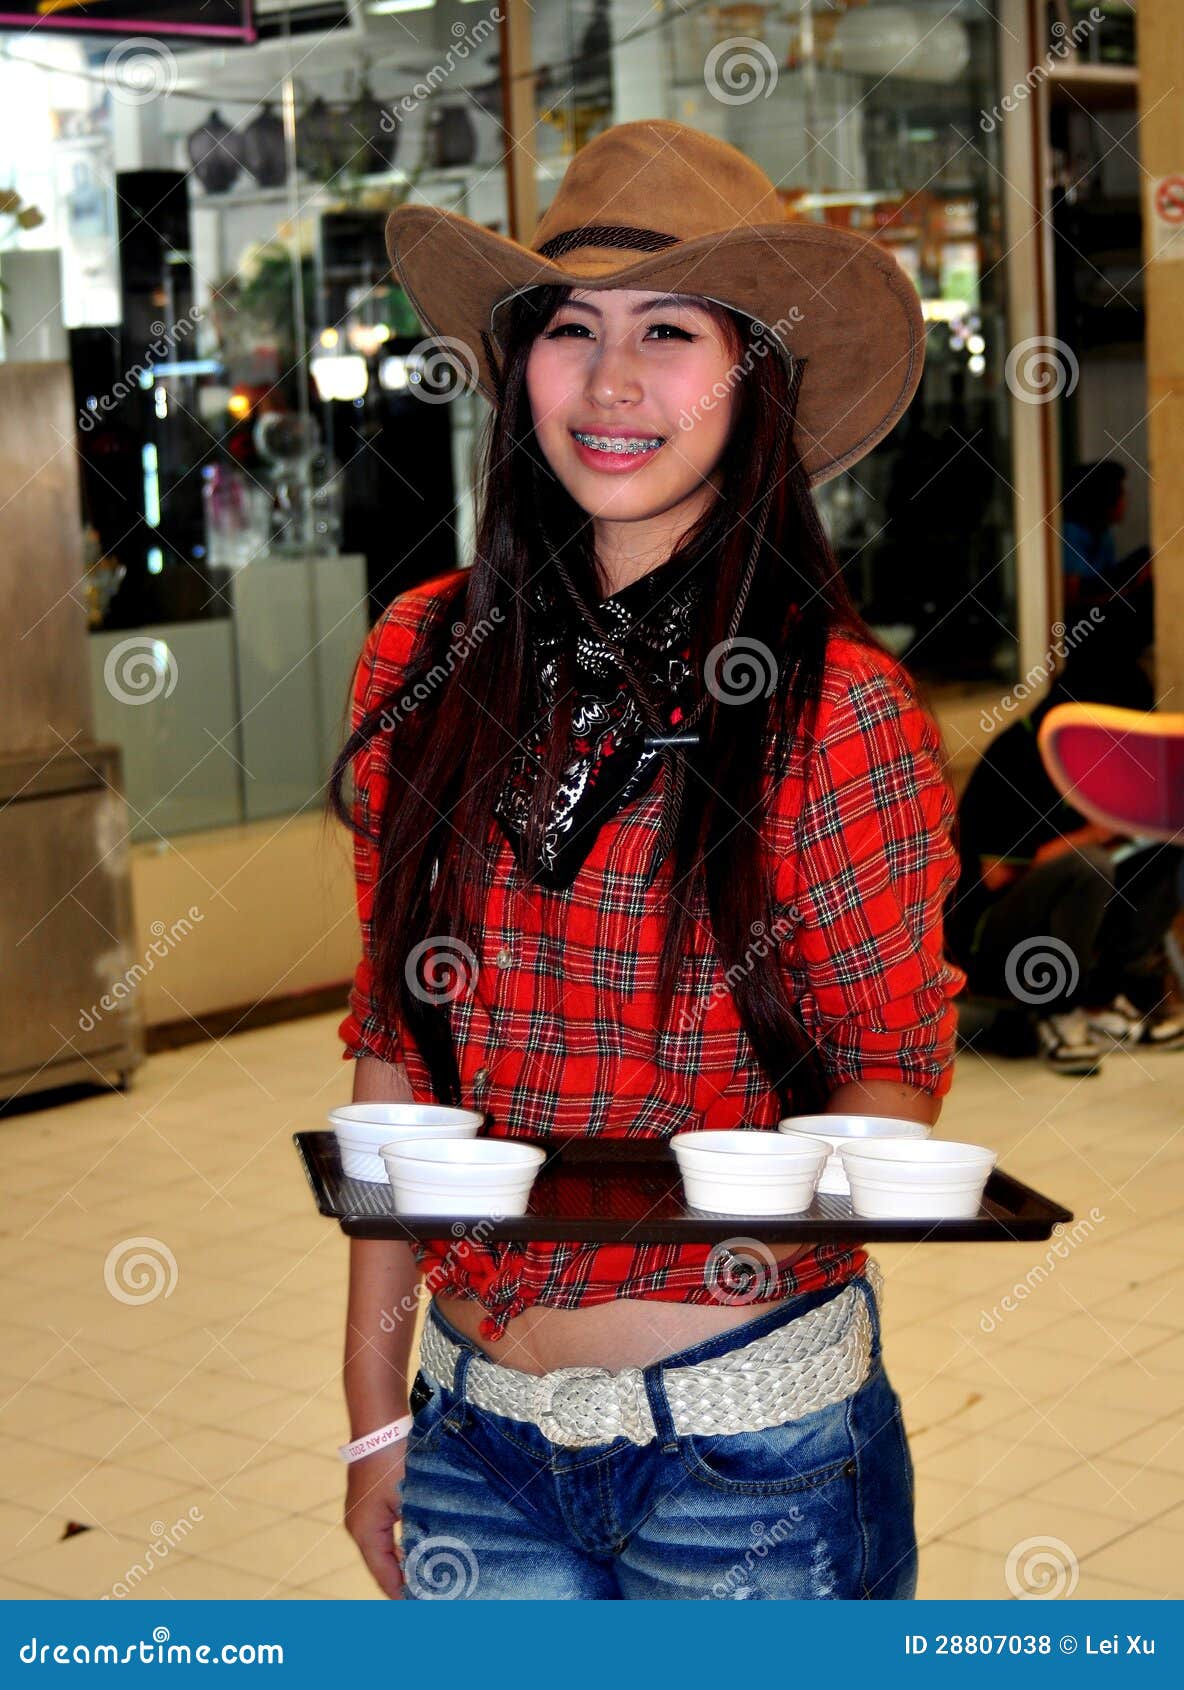 cowboy style for ladies